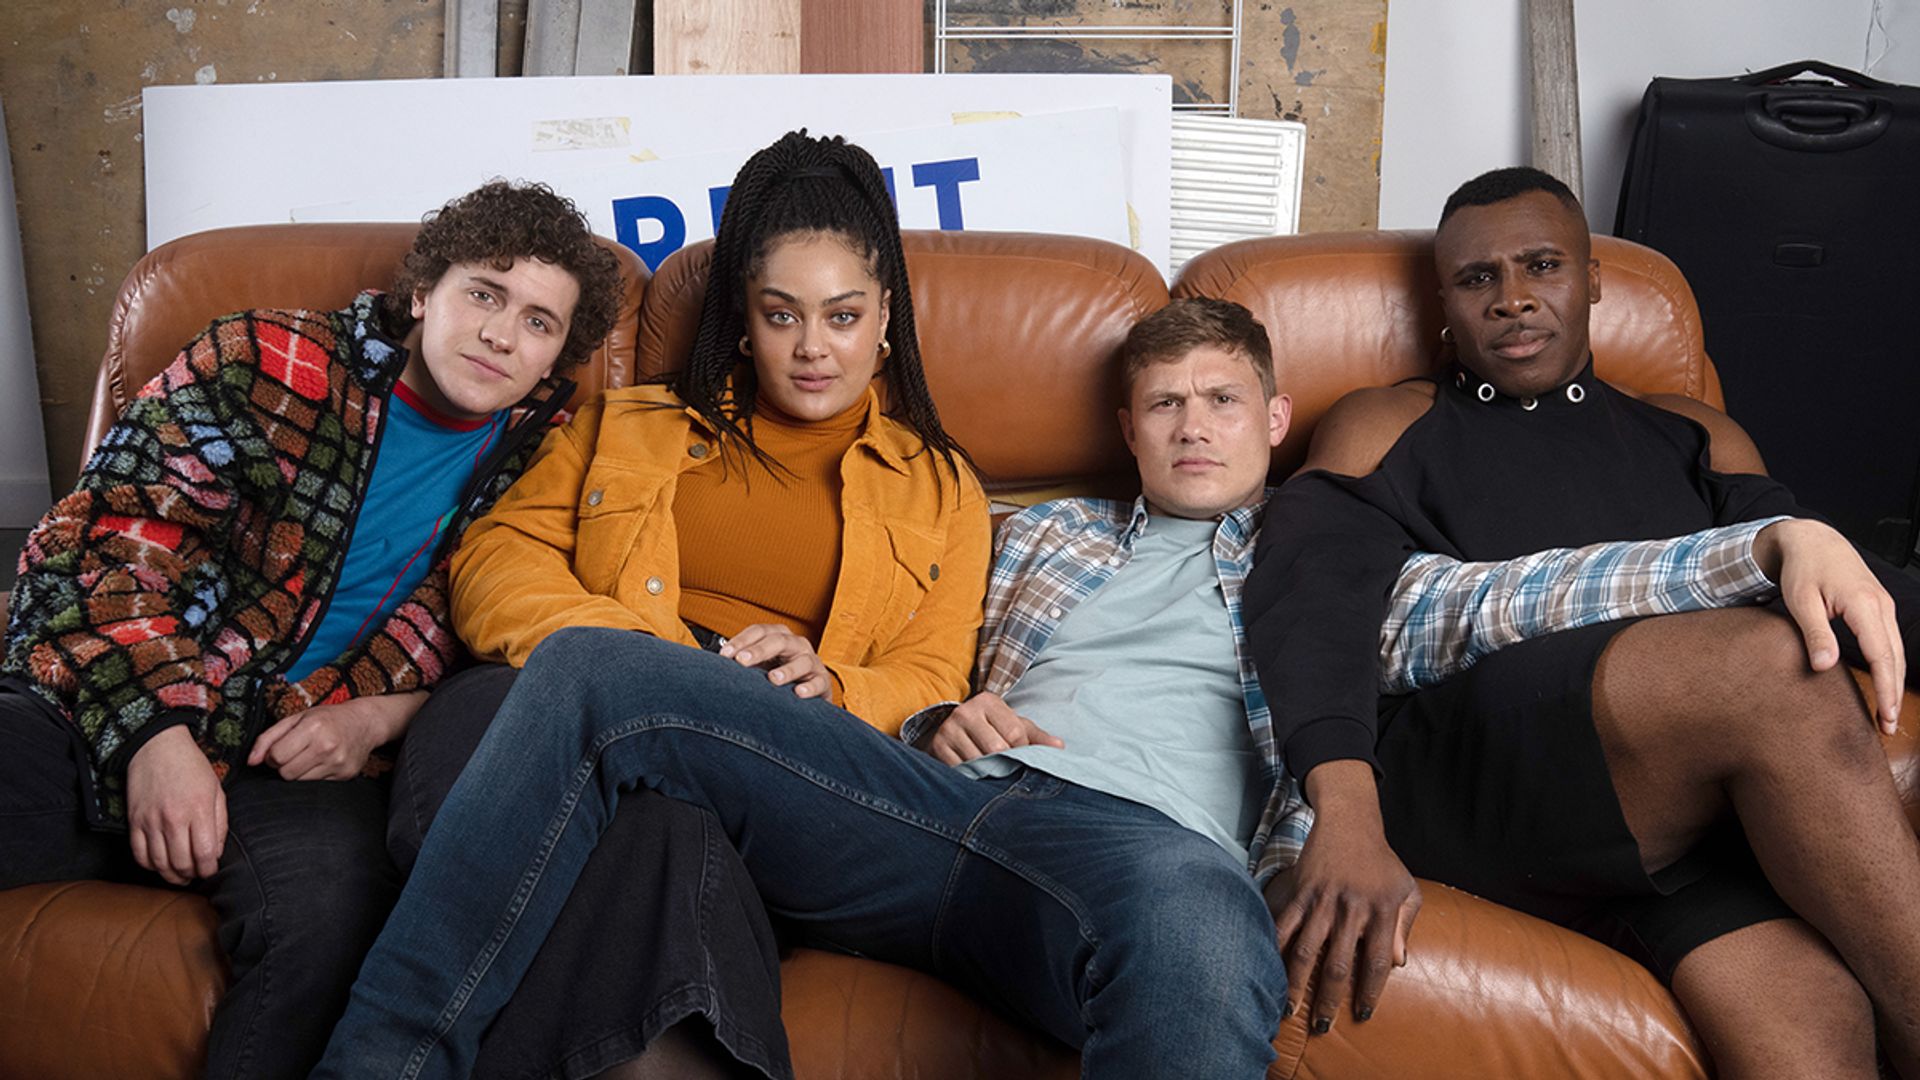 Big Boys creator Jack Rooke reveals exciting update on season 3 in major hint about show's future – Exclusive